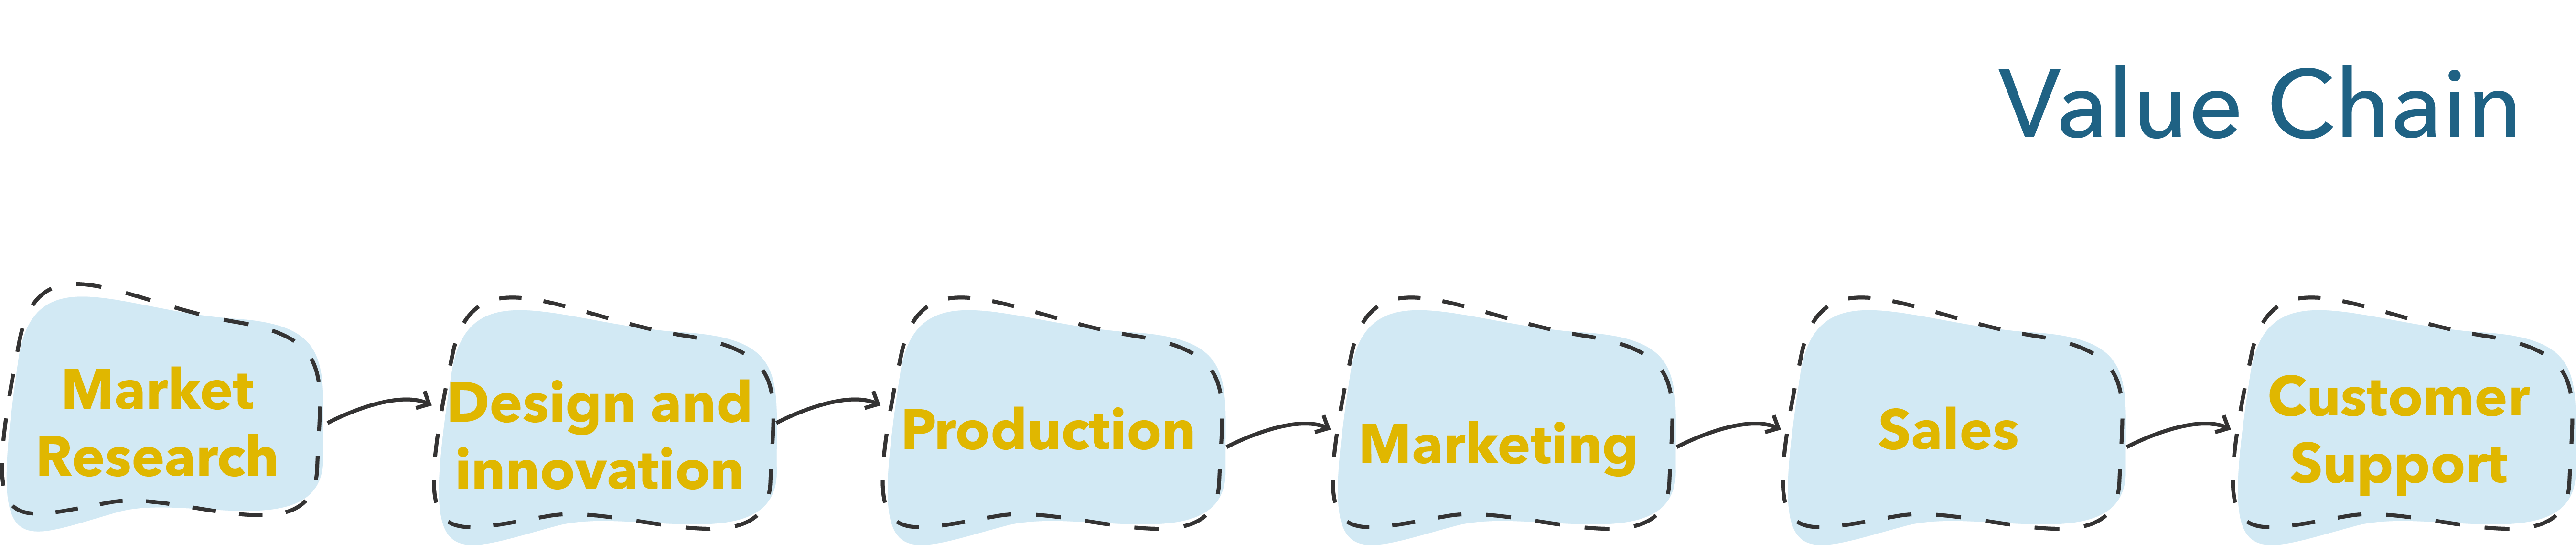 Value chain: Market research, design and innovation, production, marketing, sales, customer support.